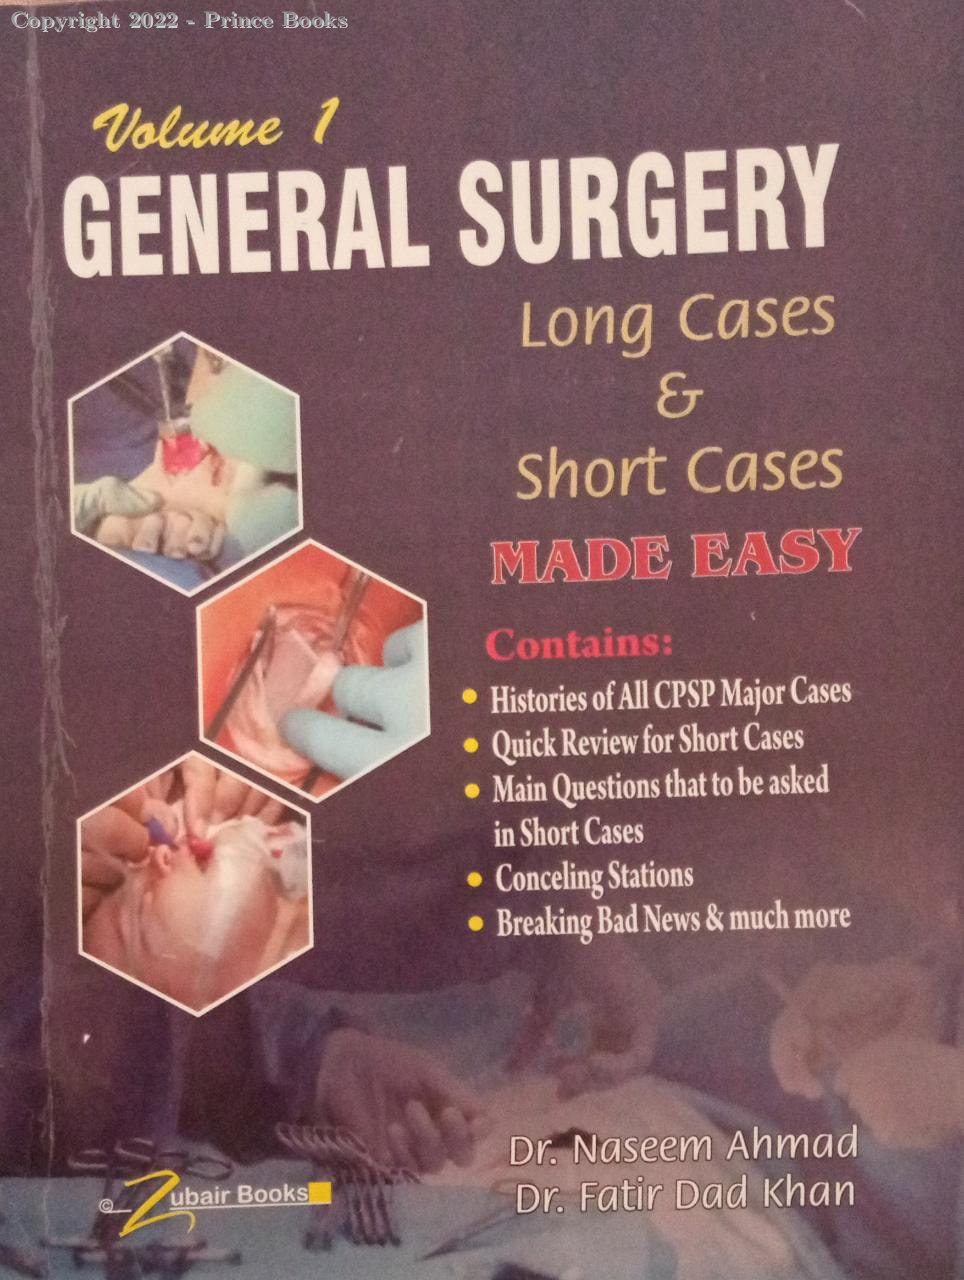 general surgery long cases & short cases made easy vol 1